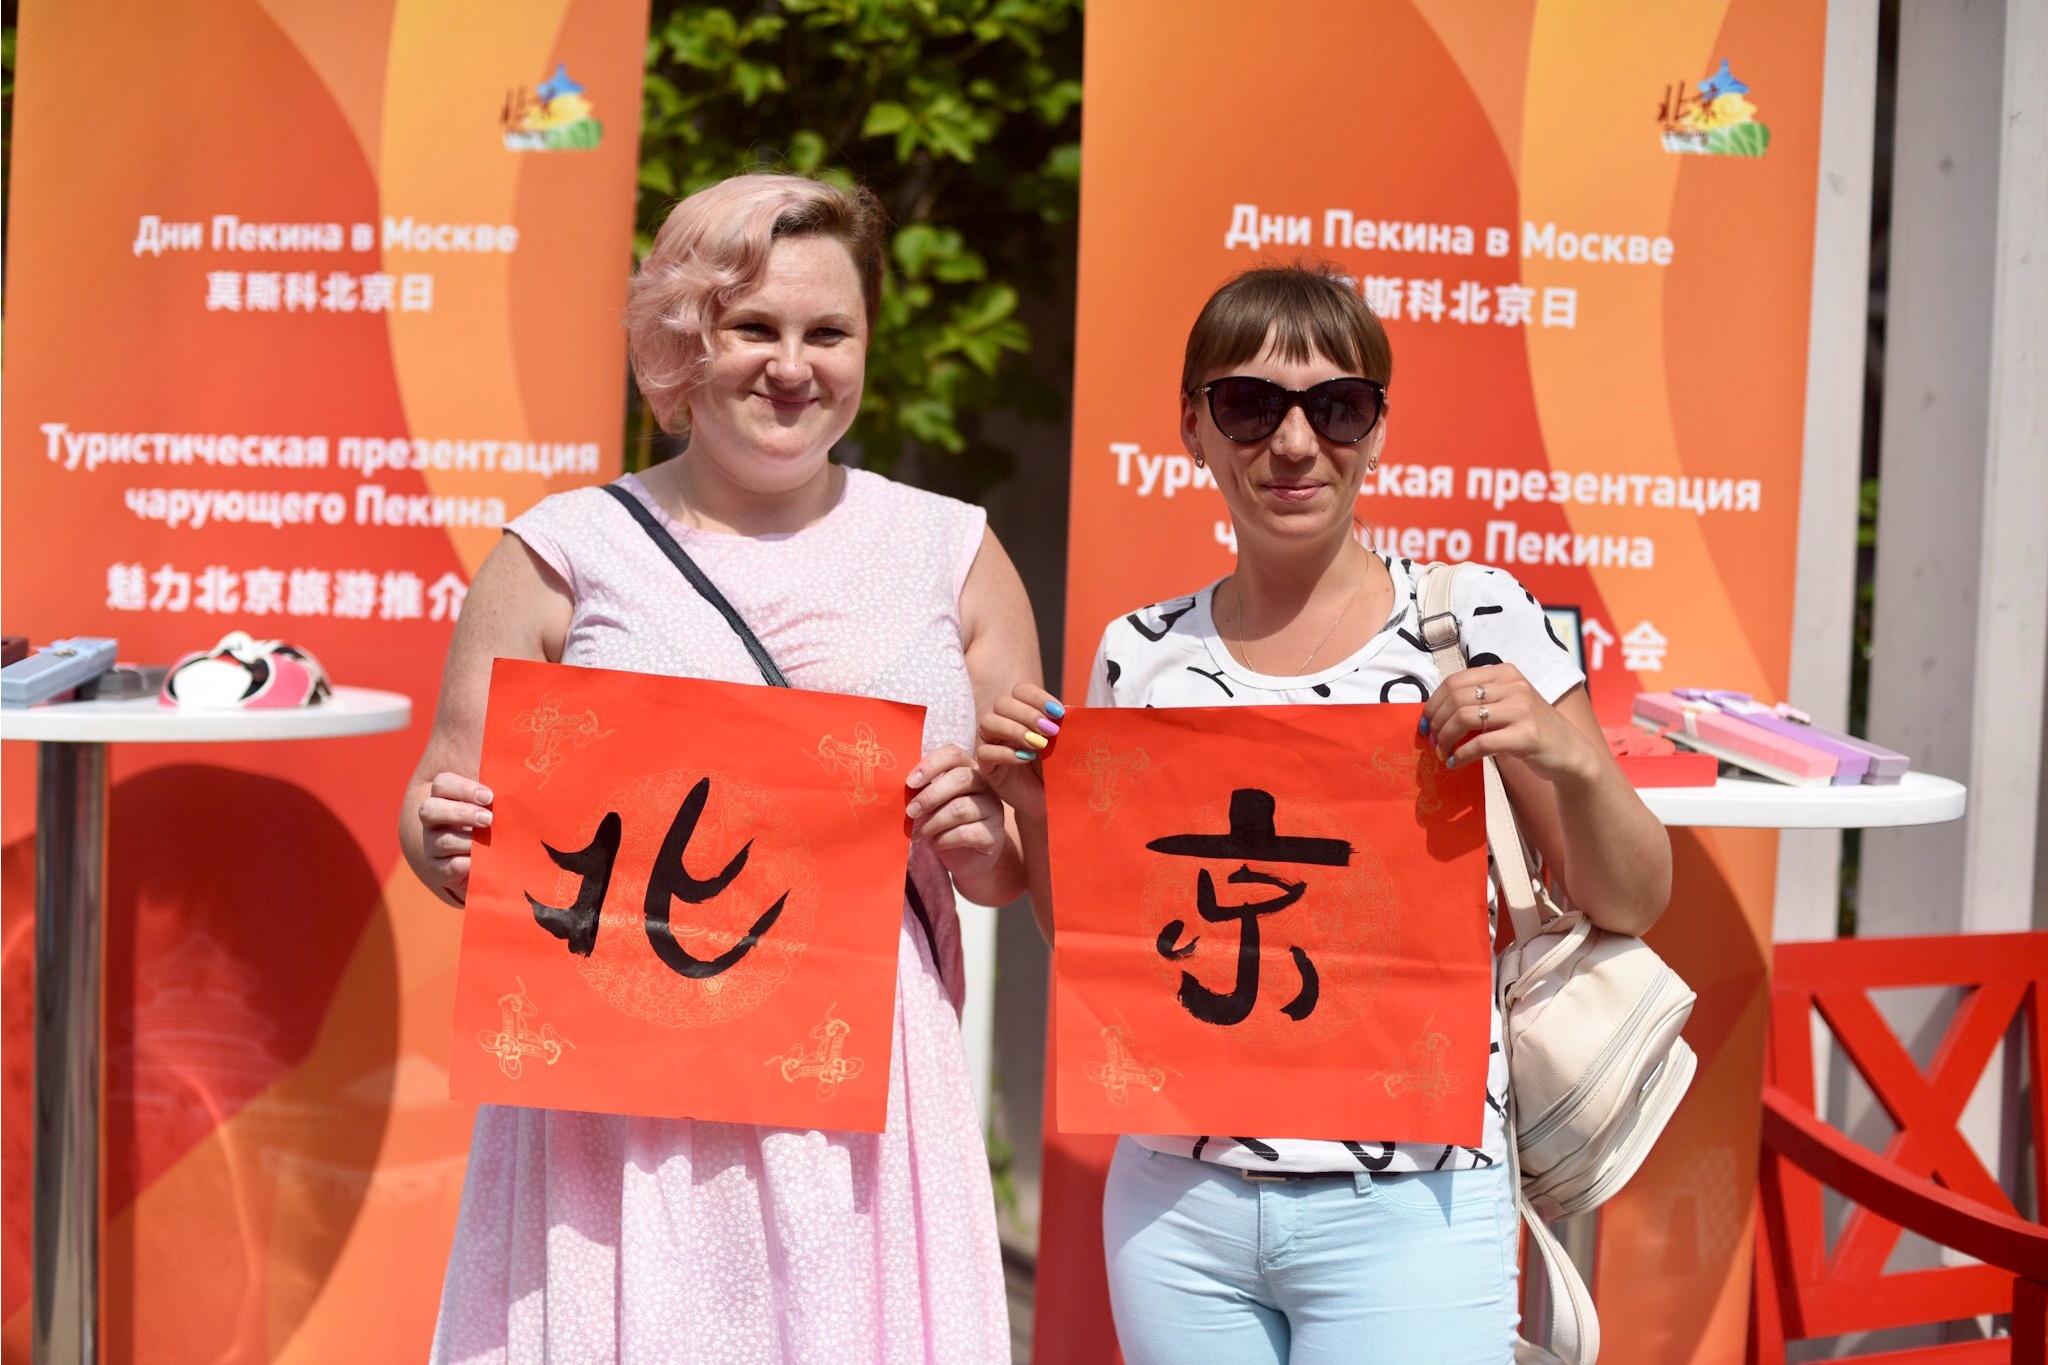 Beijing Tourism Promotion Activity Held in Moscow, Russia_04.jpg